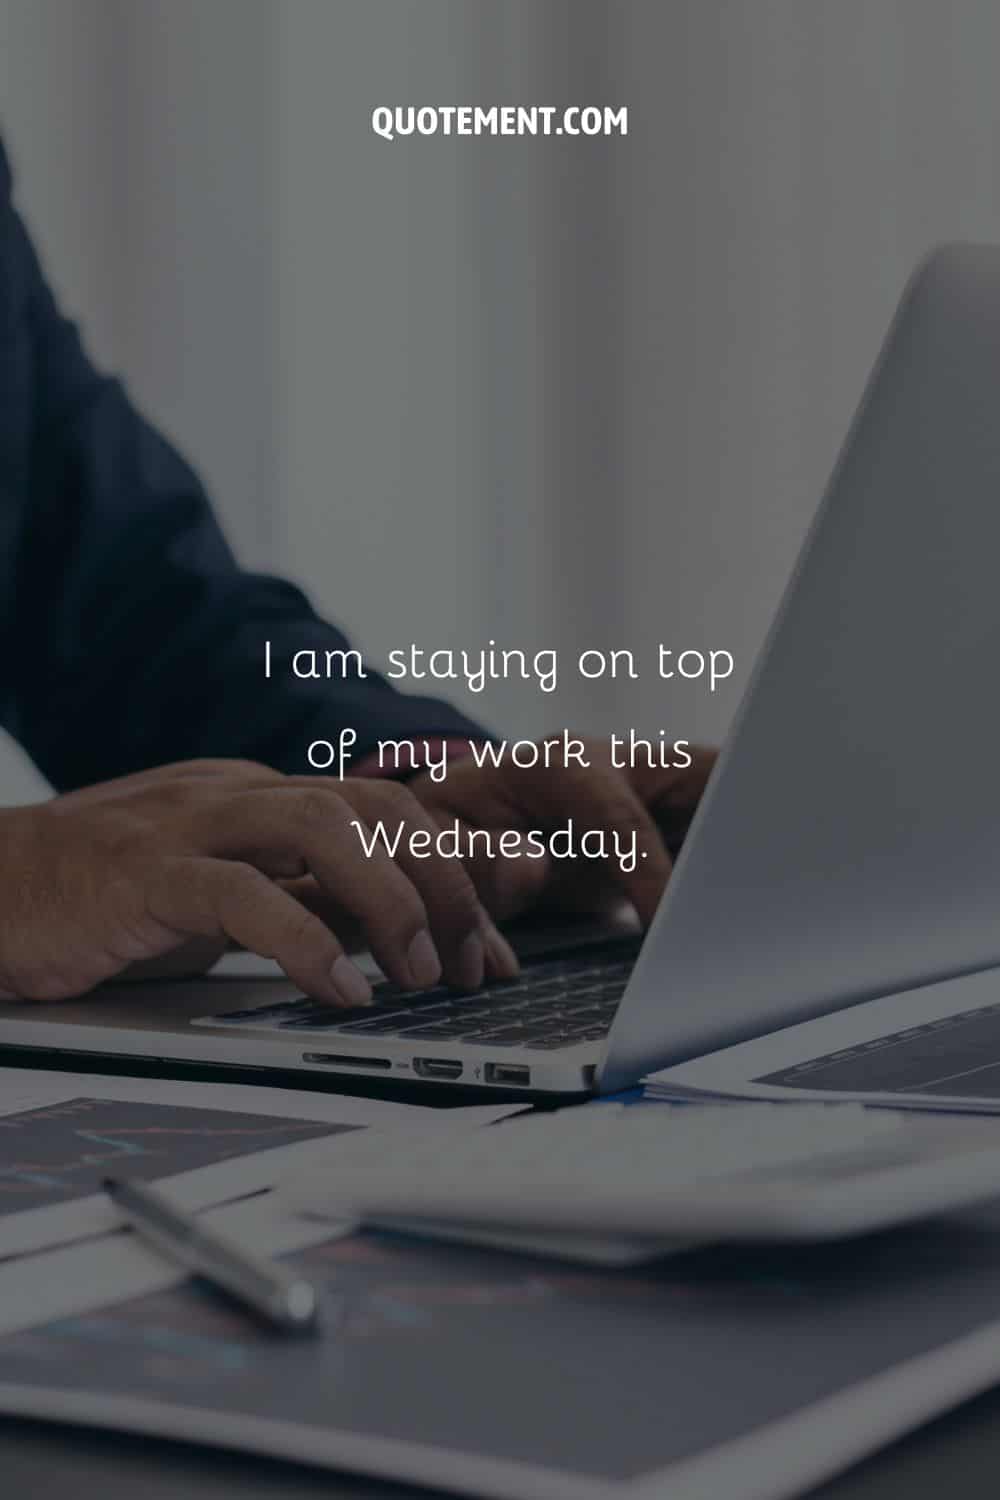 Image of a laptop representing an affirmation for work.